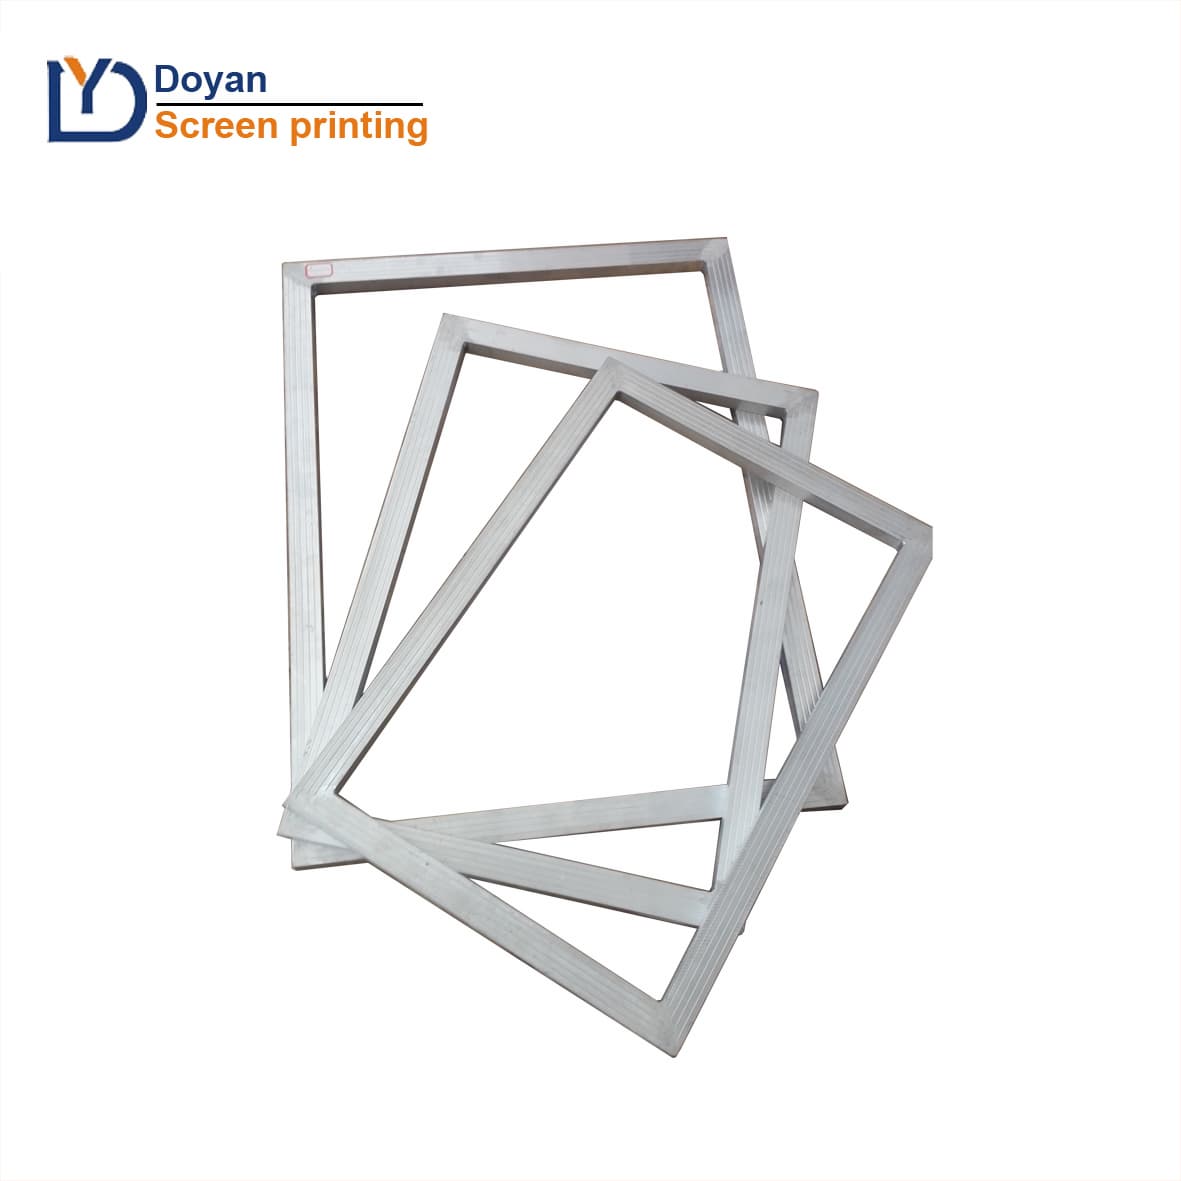 Aluminum frame for screen printing with high quality